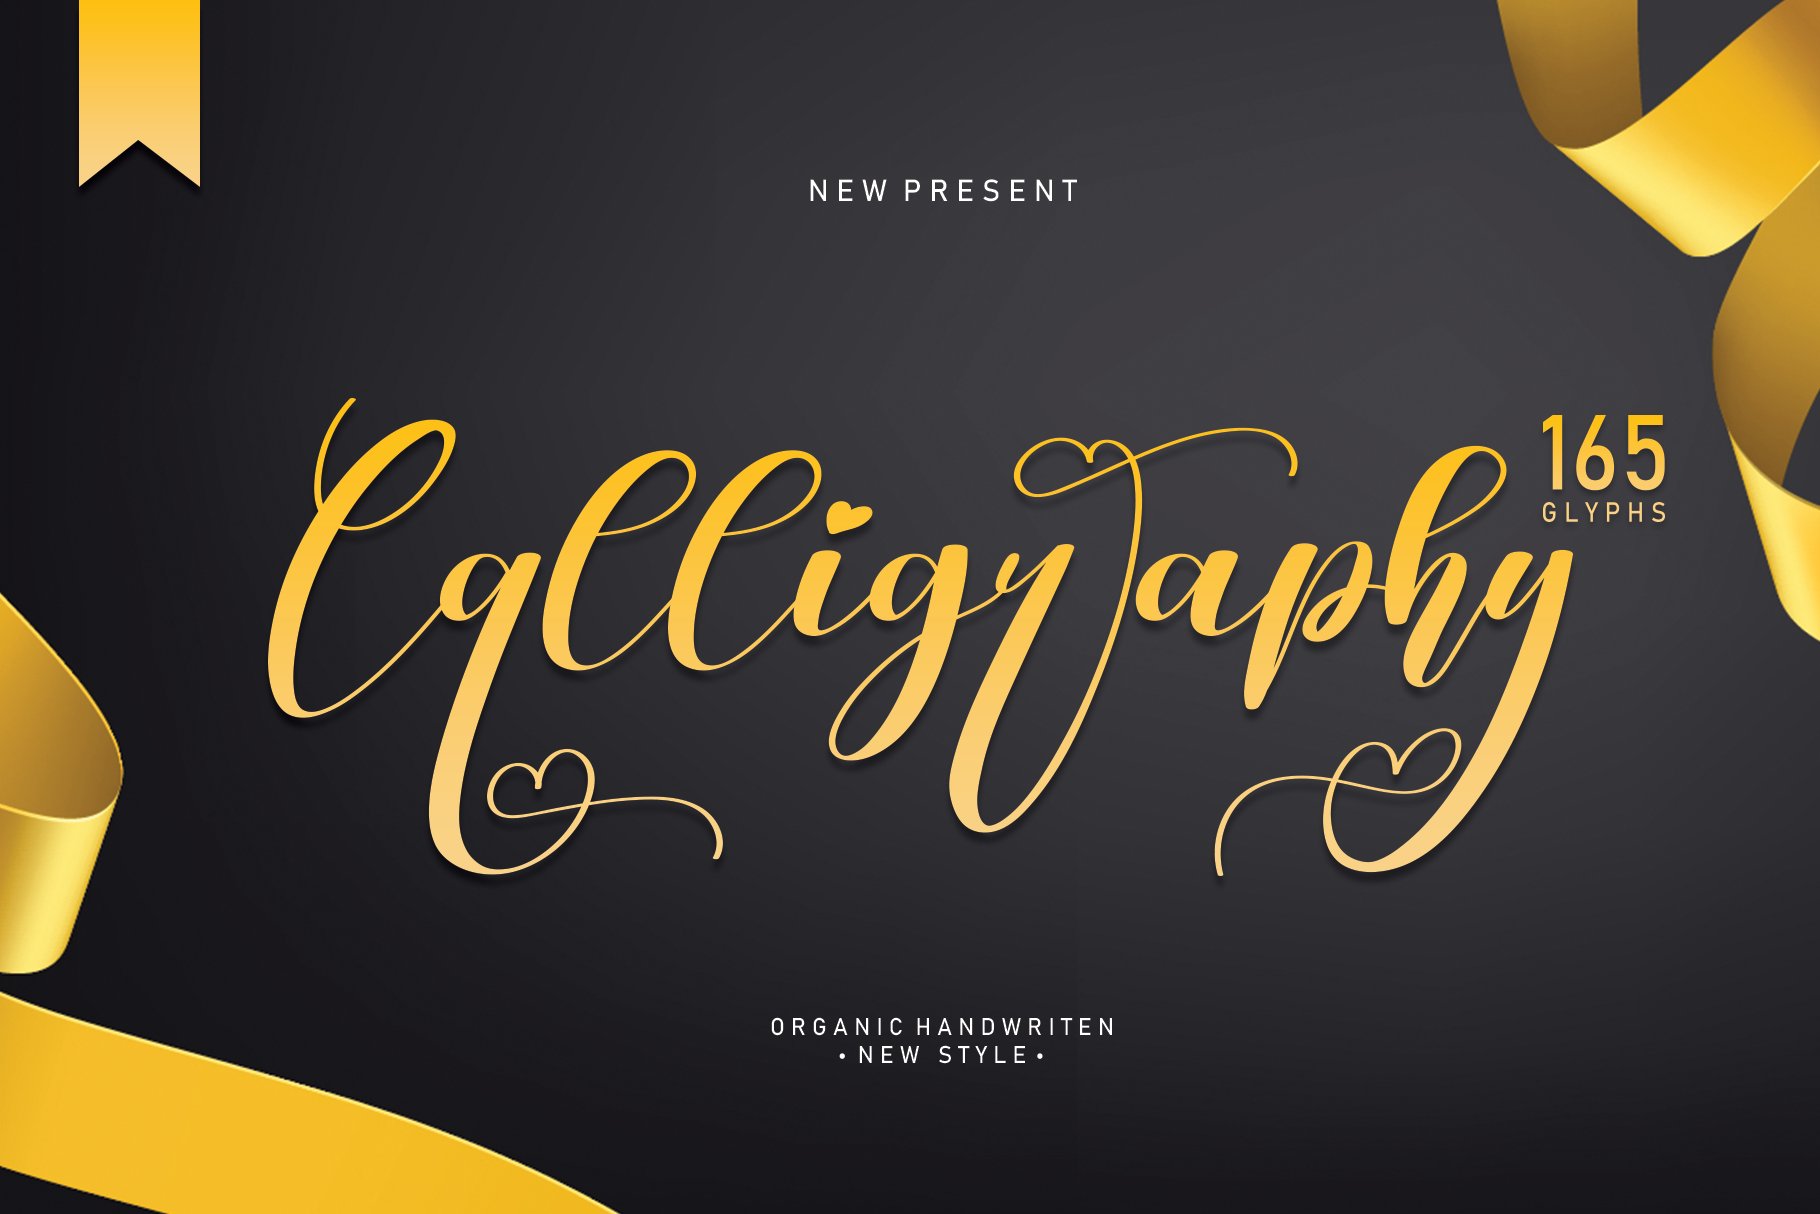 Calligraphy | Script font cover image.